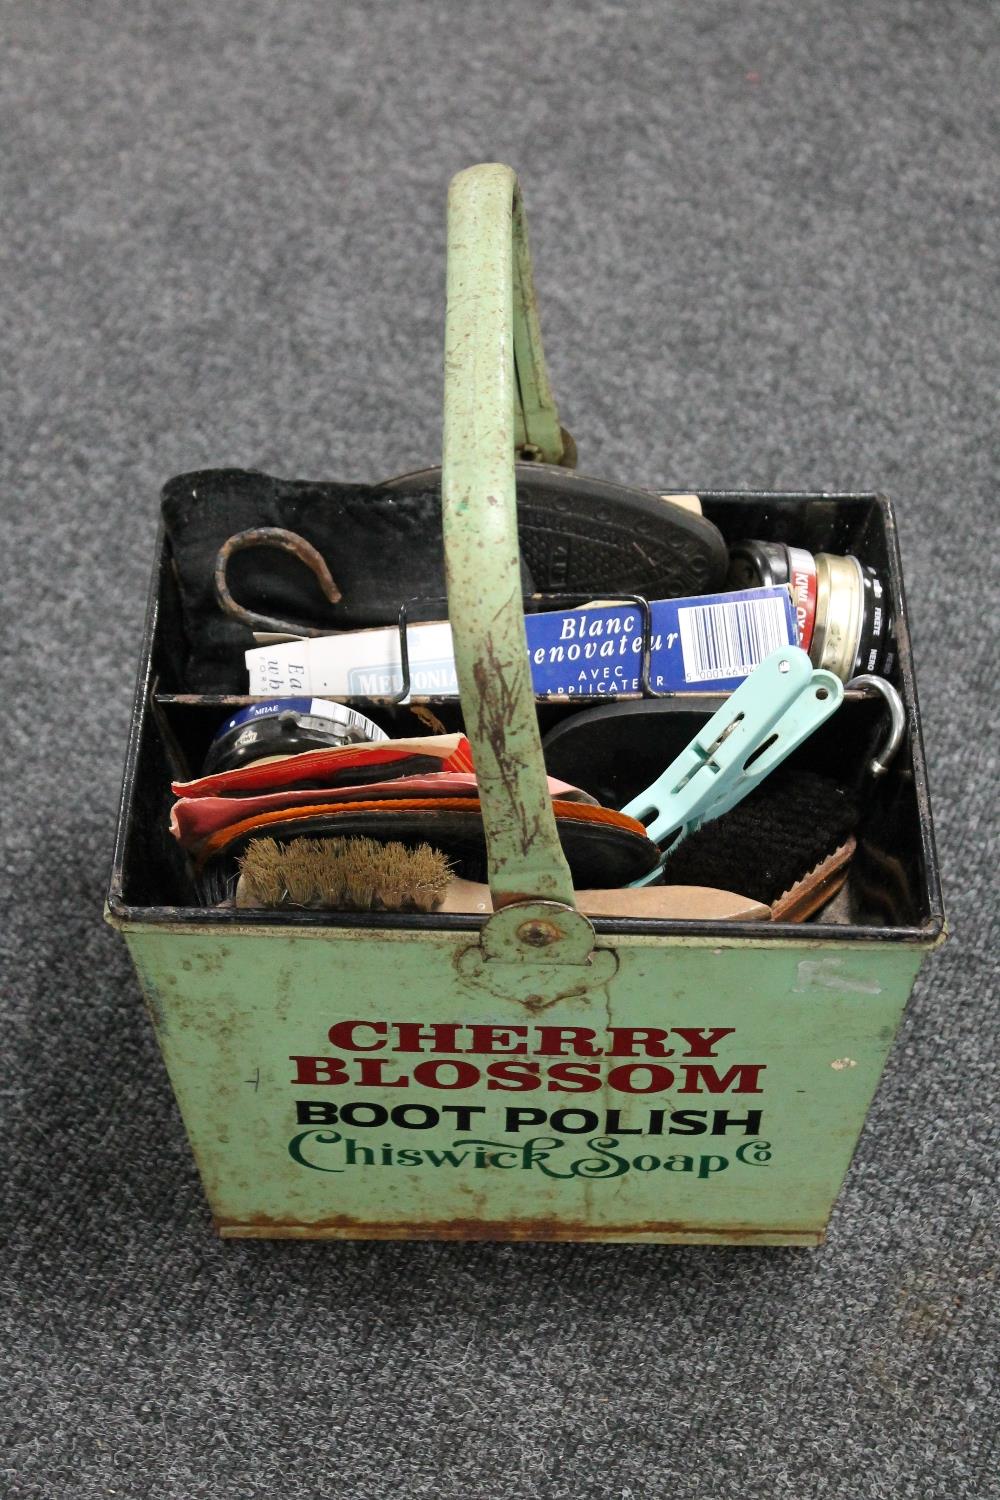 A metal cherry blossom boot polish basket with contents